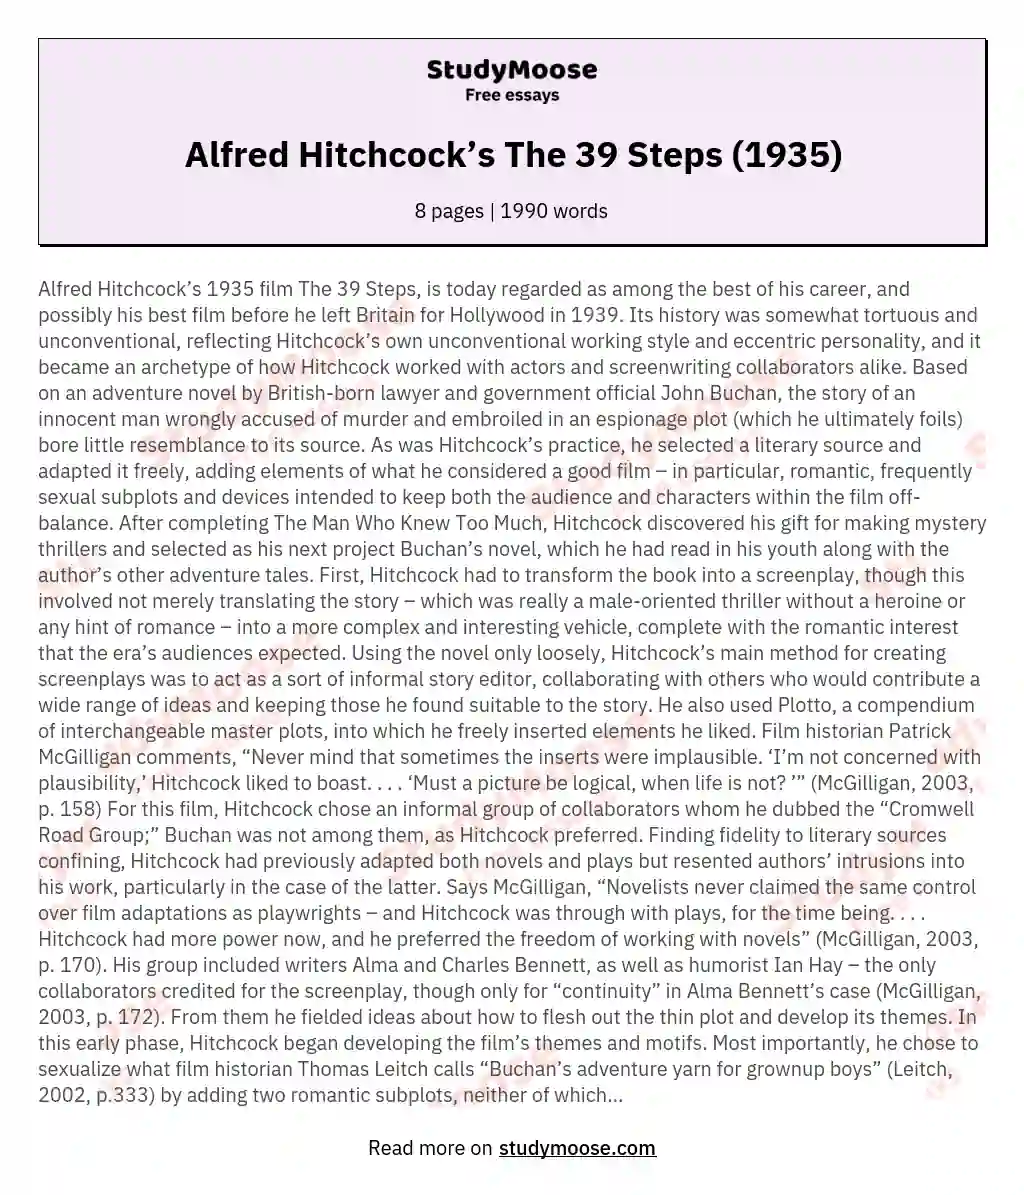 Alfred Hitchcock’s The 39 Steps (1935)